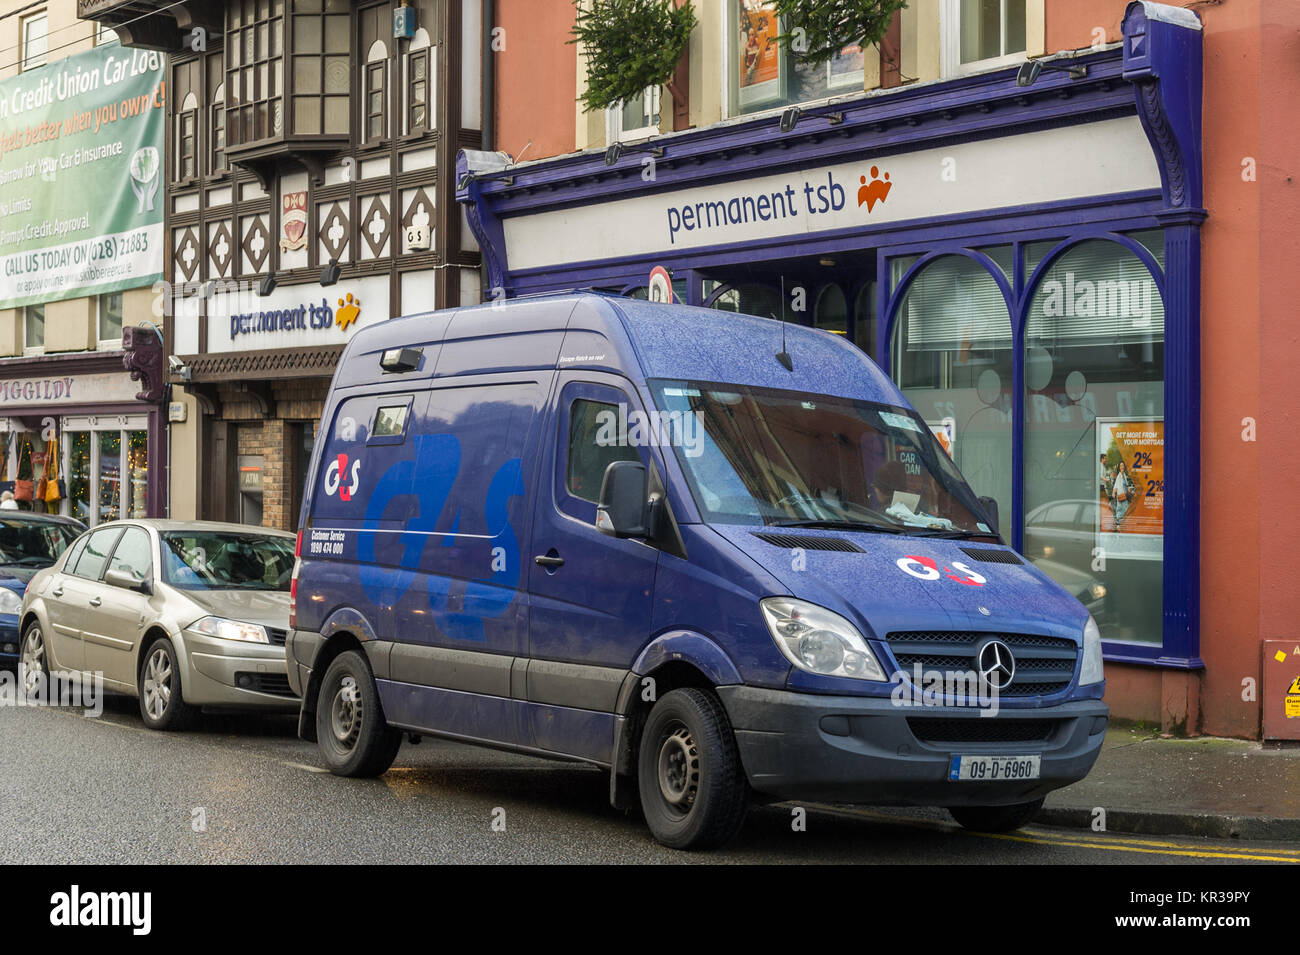 G4S Cash in Transit van outside a branch of Permanent TSB in Skibbereen, County Cork, Ireland. Stock Photo